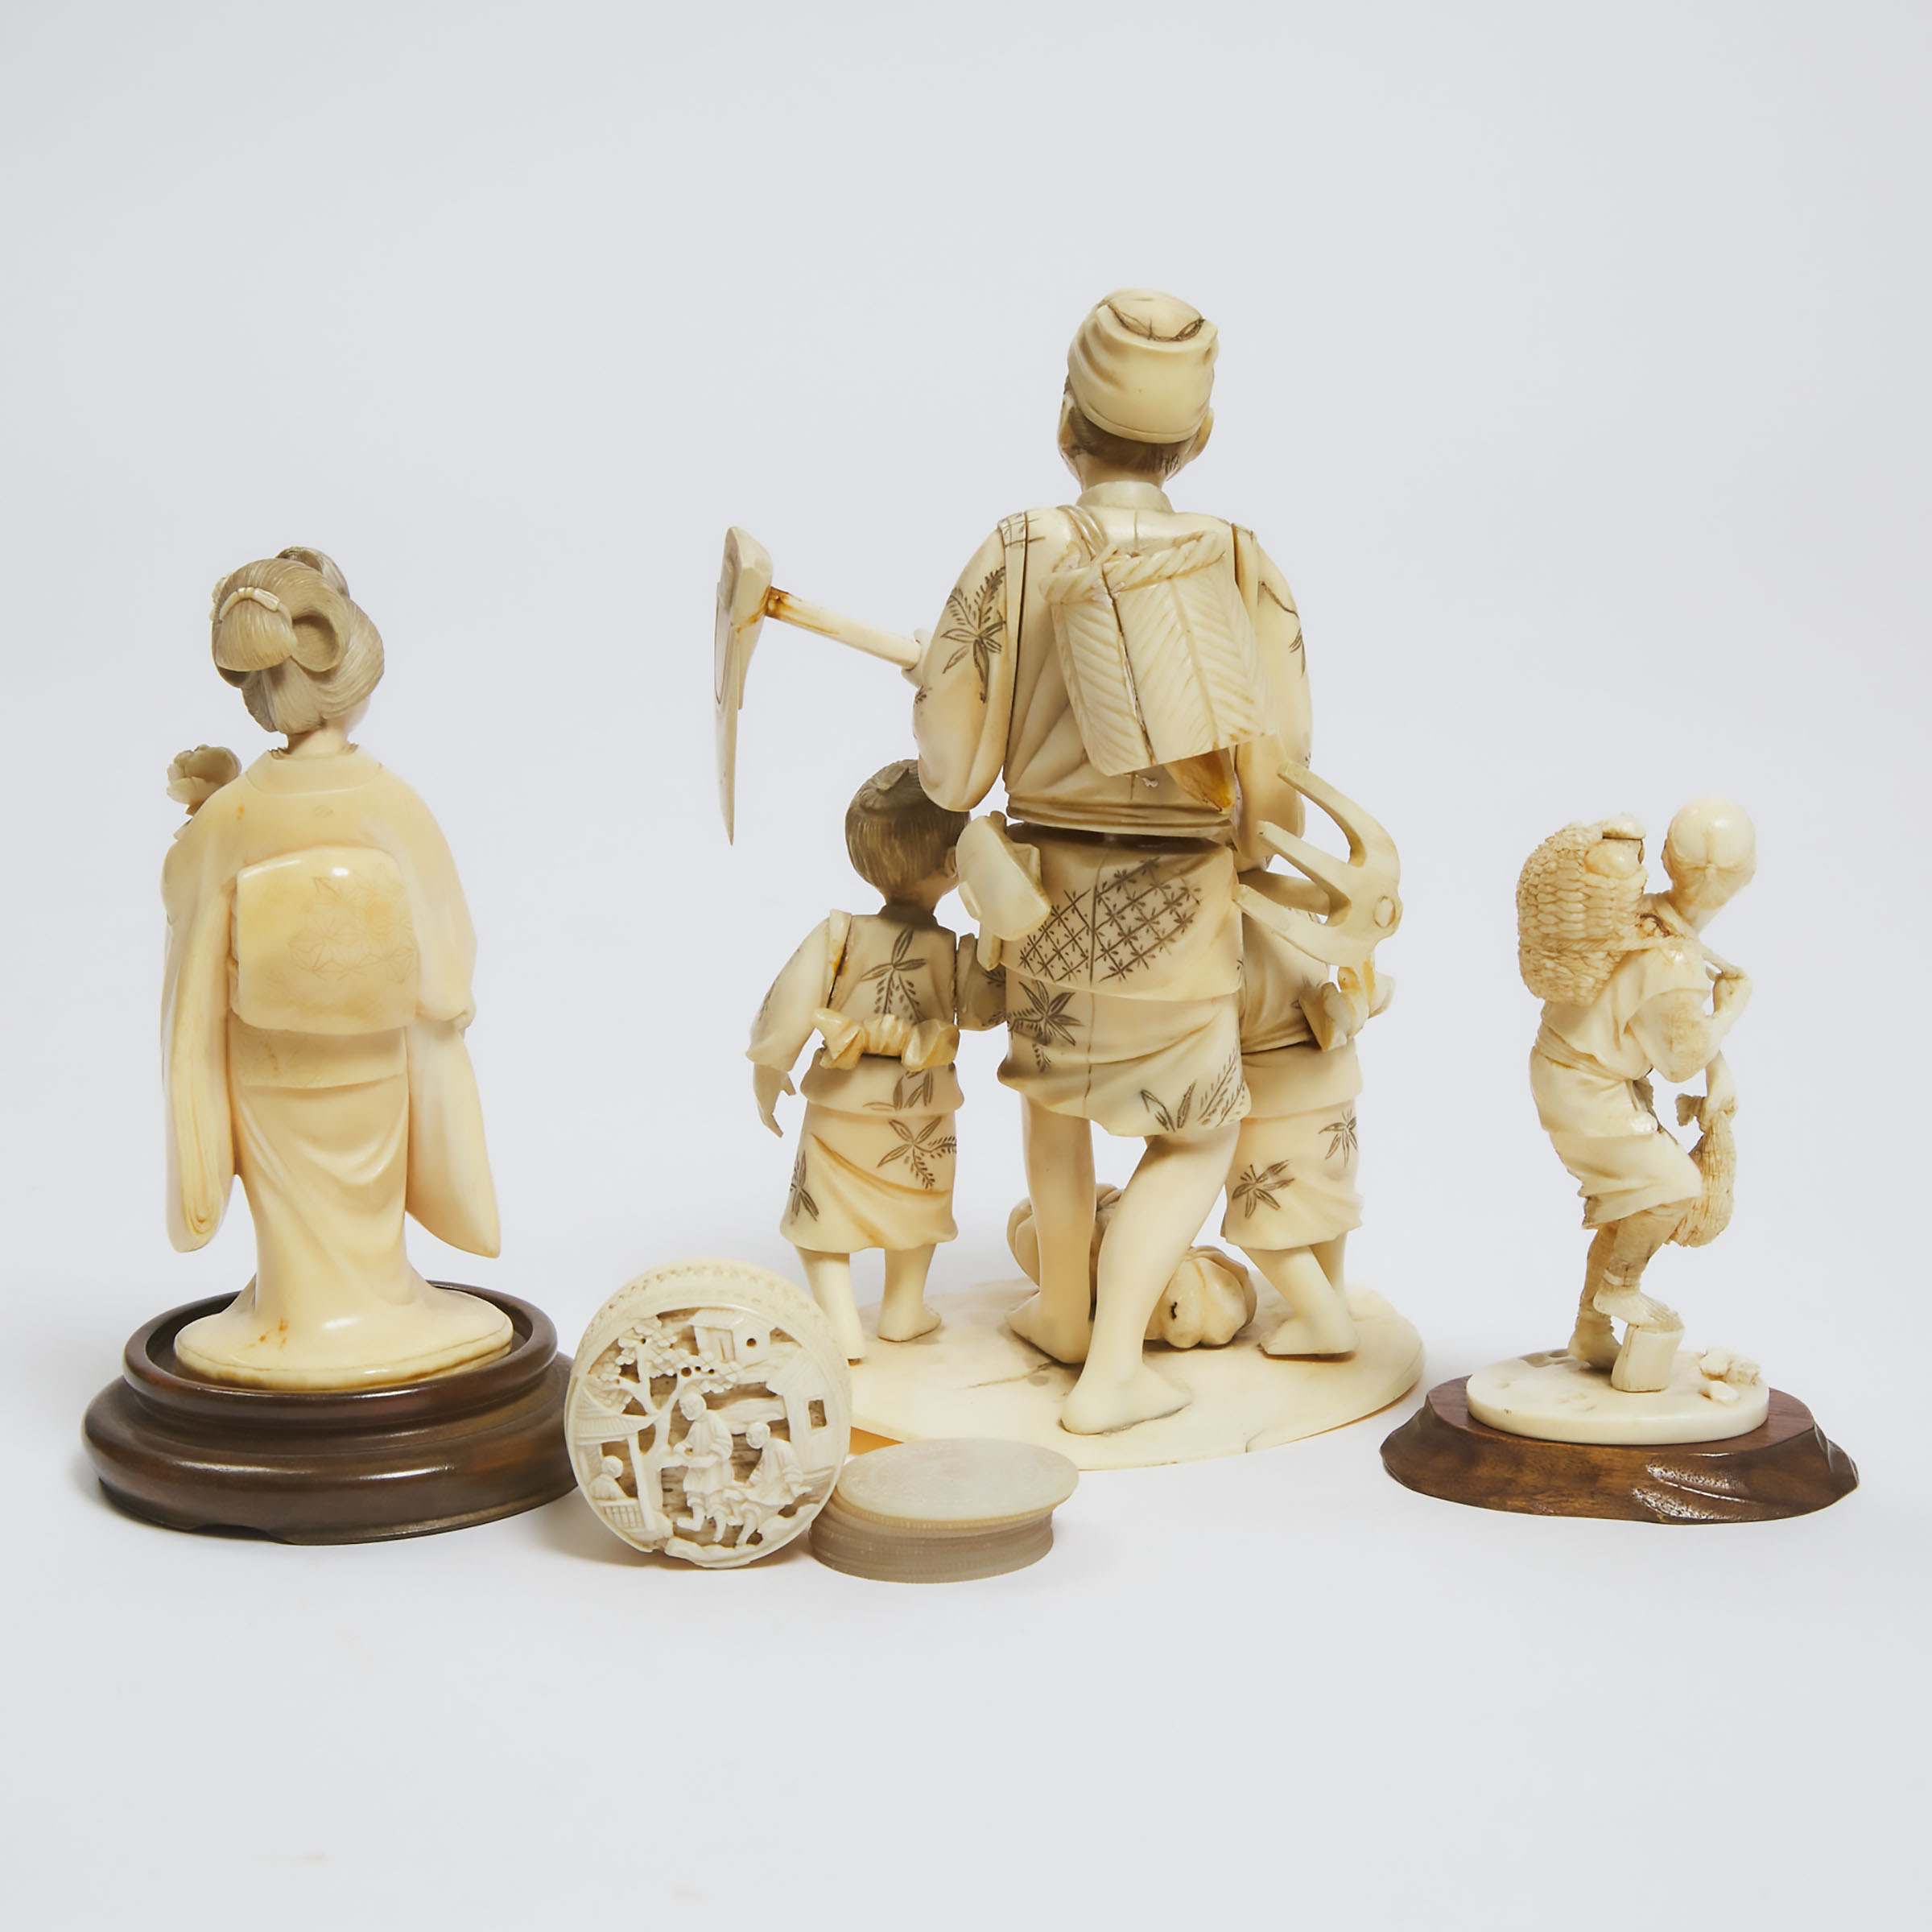 A Group of Three Ivory Okimono, Together With a Box and Counters, Late 19th/Early 20th Century